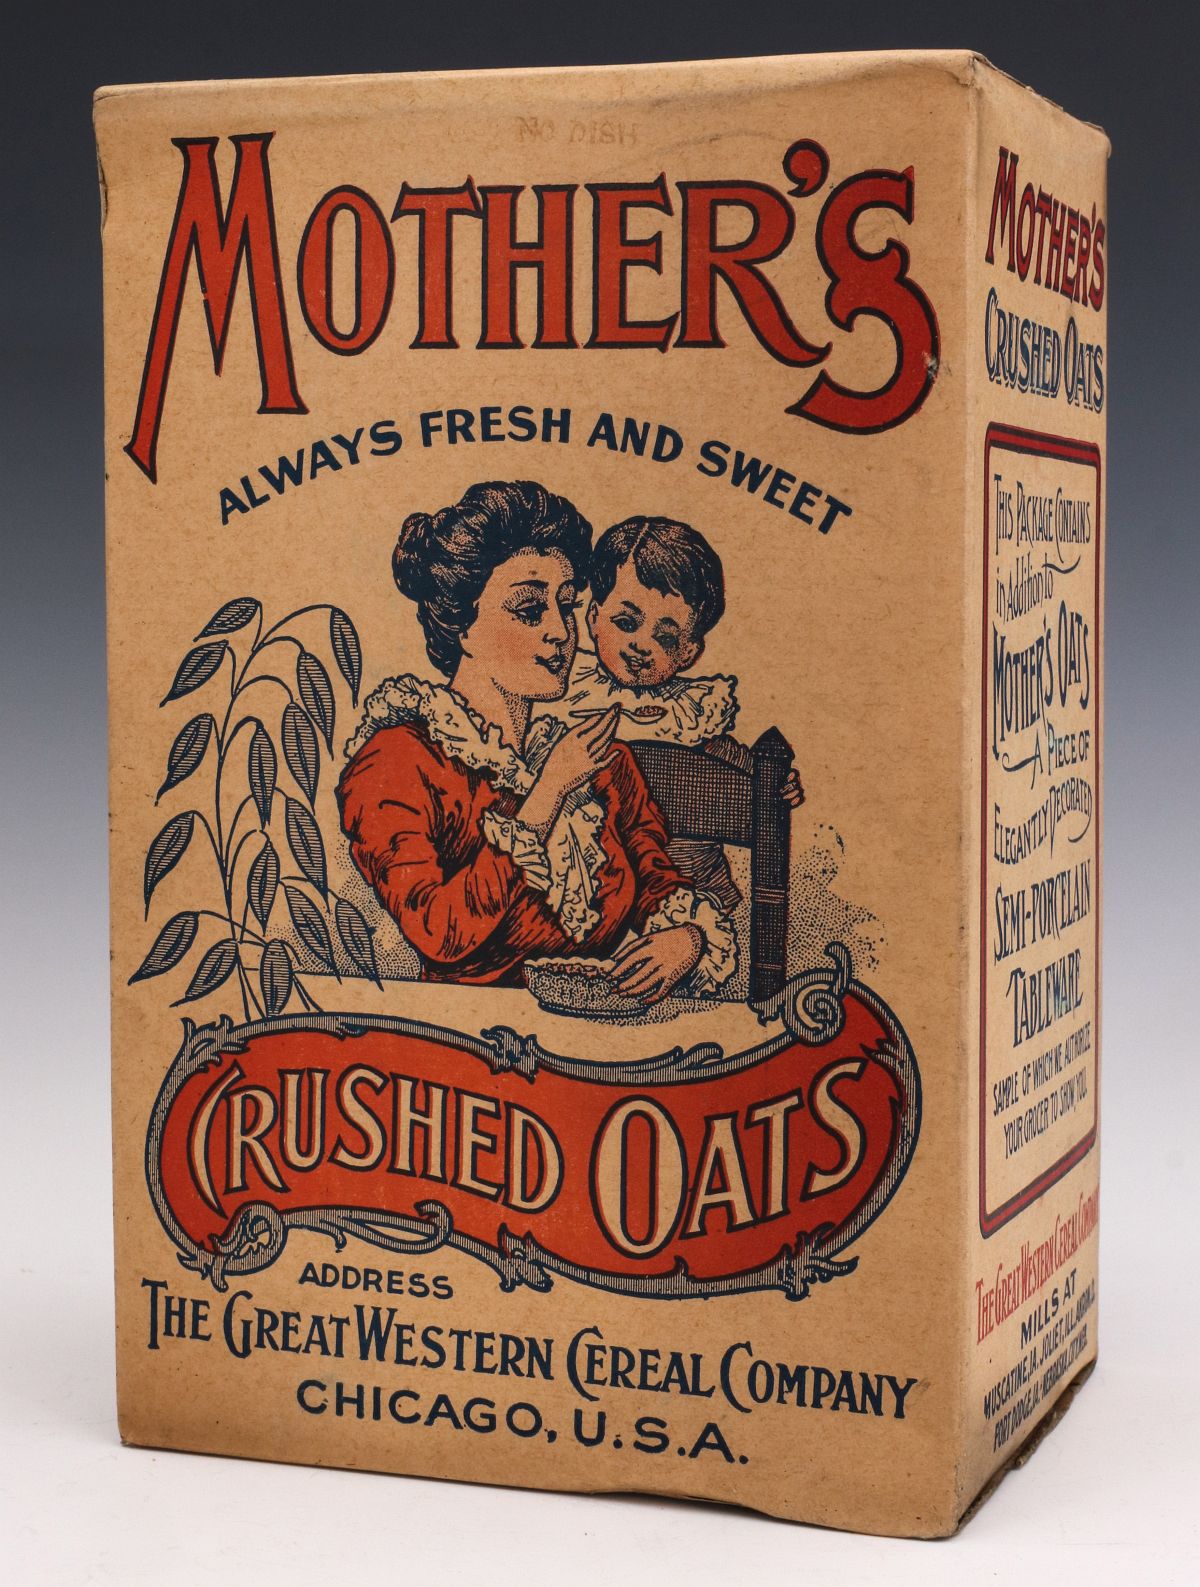 A MOTHER'S BRAND CRUSHED OATS CEREAL BOX C 1910